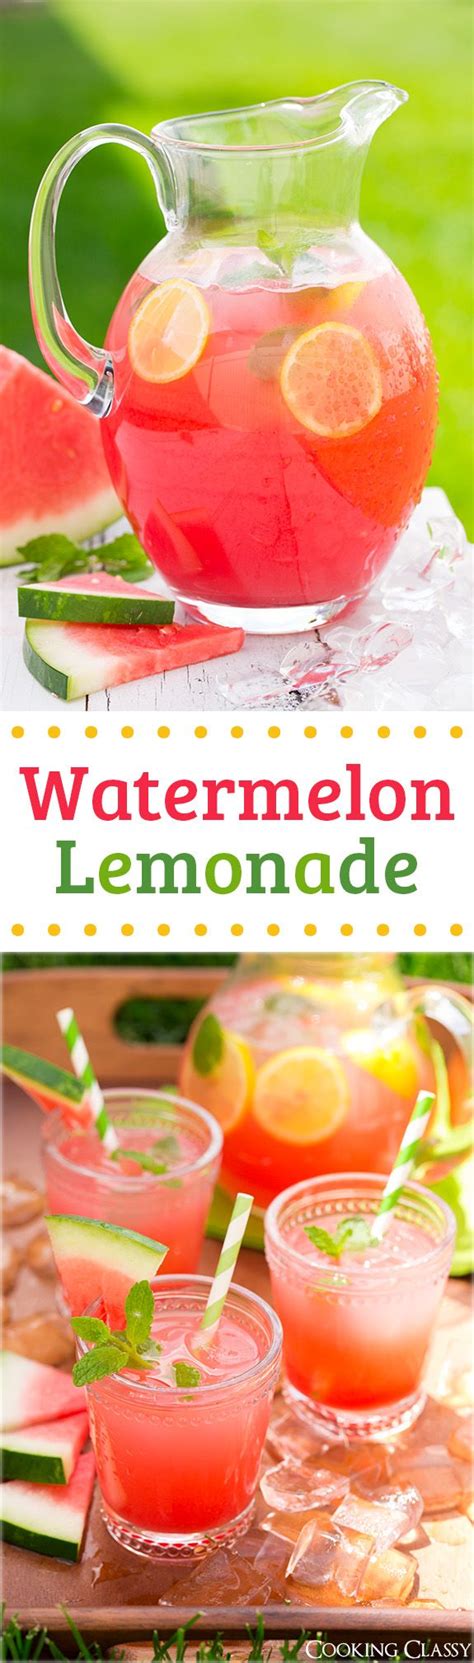 367 Best Watermelon And Other Fruit Ideas Images On Pinterest